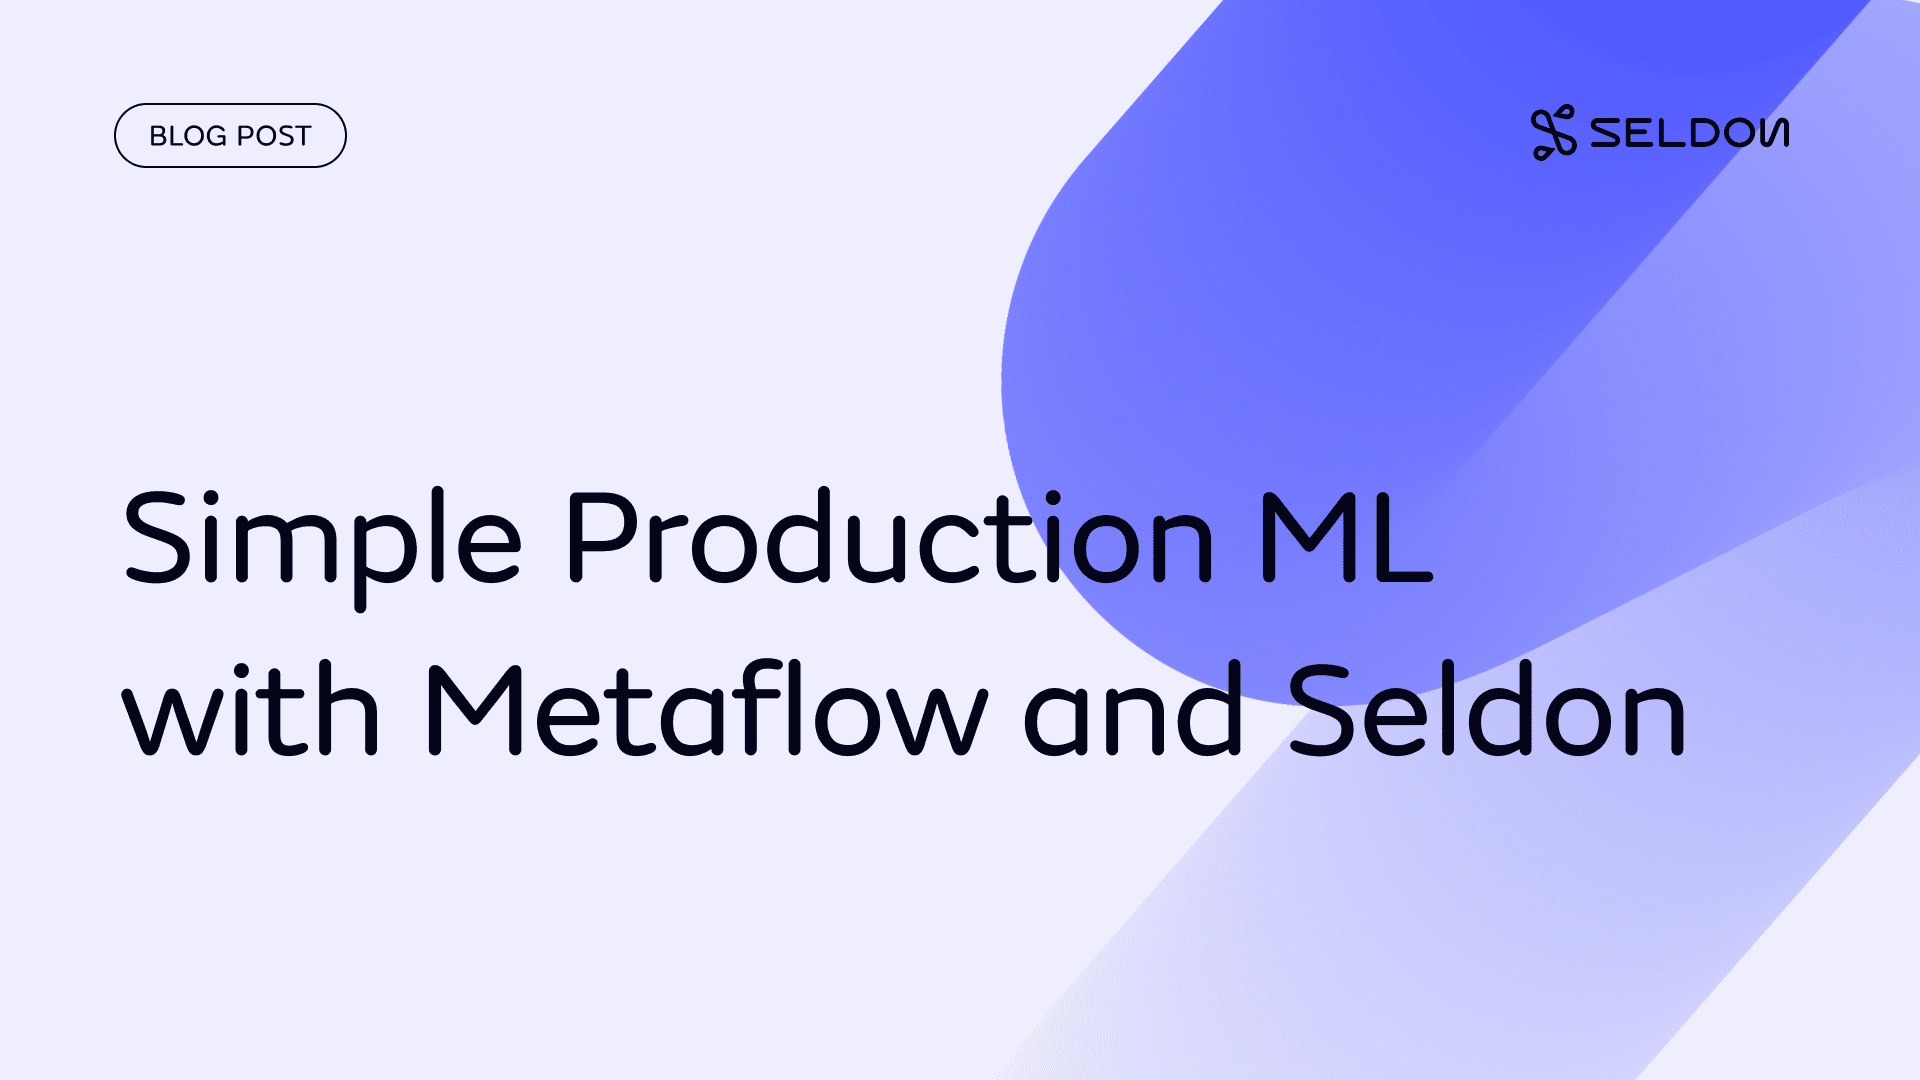 Simple Production ML with Metaflow and Seldon